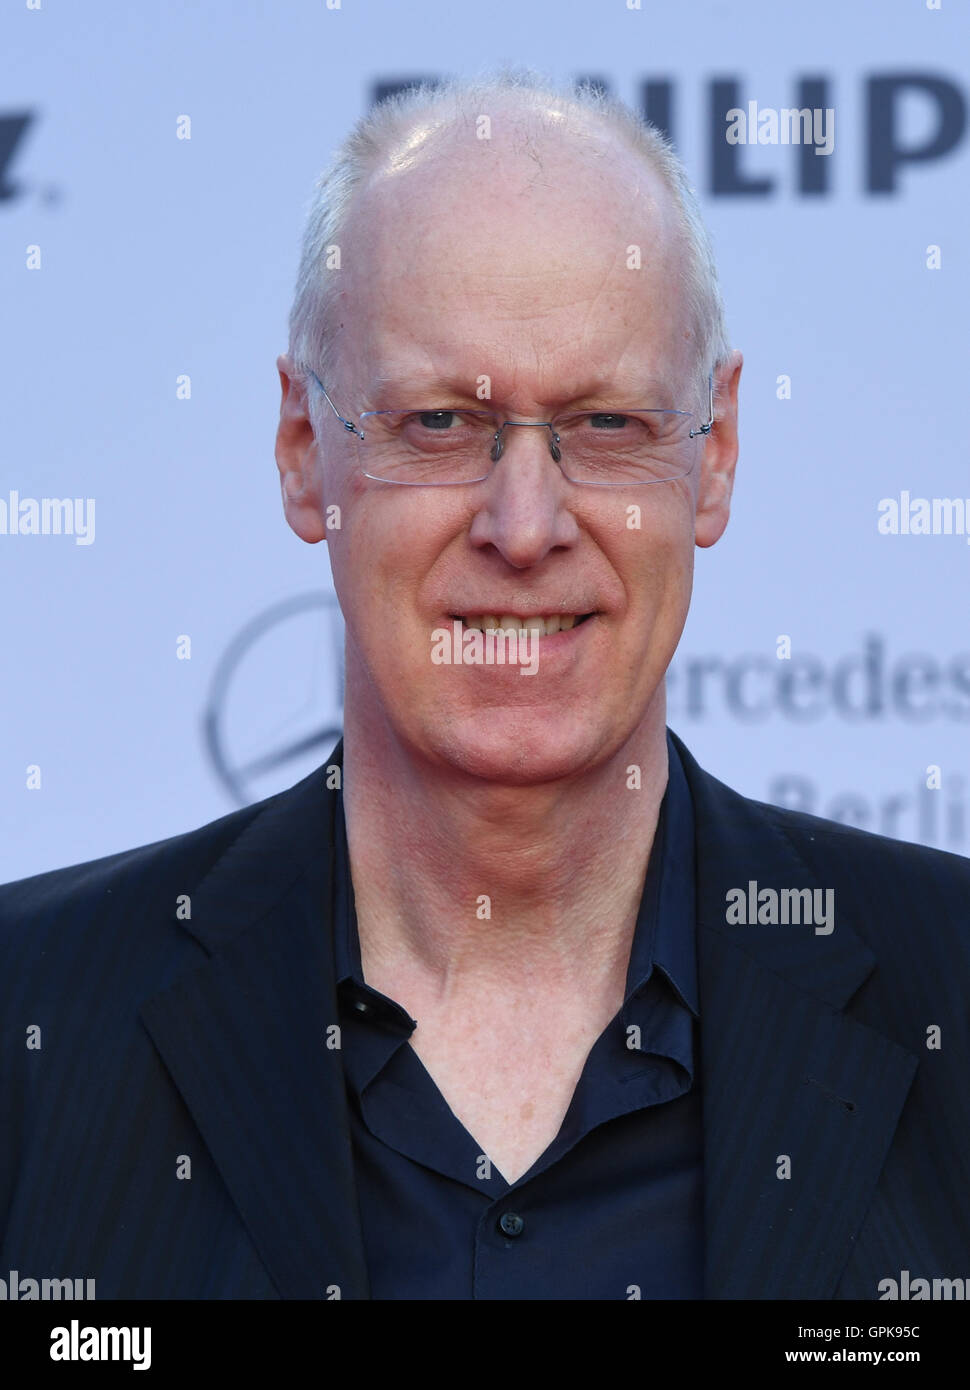 Berlin, Germany. 1st Sep, 2016. Actor Gottfried Vollmer posing during the opening gala of the Internationale Funk-Ausstellung IFA electronics fair in Berlin, Germany, 1 September 2016. The IFA is known as the world's biggest fair for entertainment technology, IT and household appliances and takes place between 2 and 7 September 2016. PHOTO: SOEREN STACHE/dpa/Alamy Live News Stock Photo